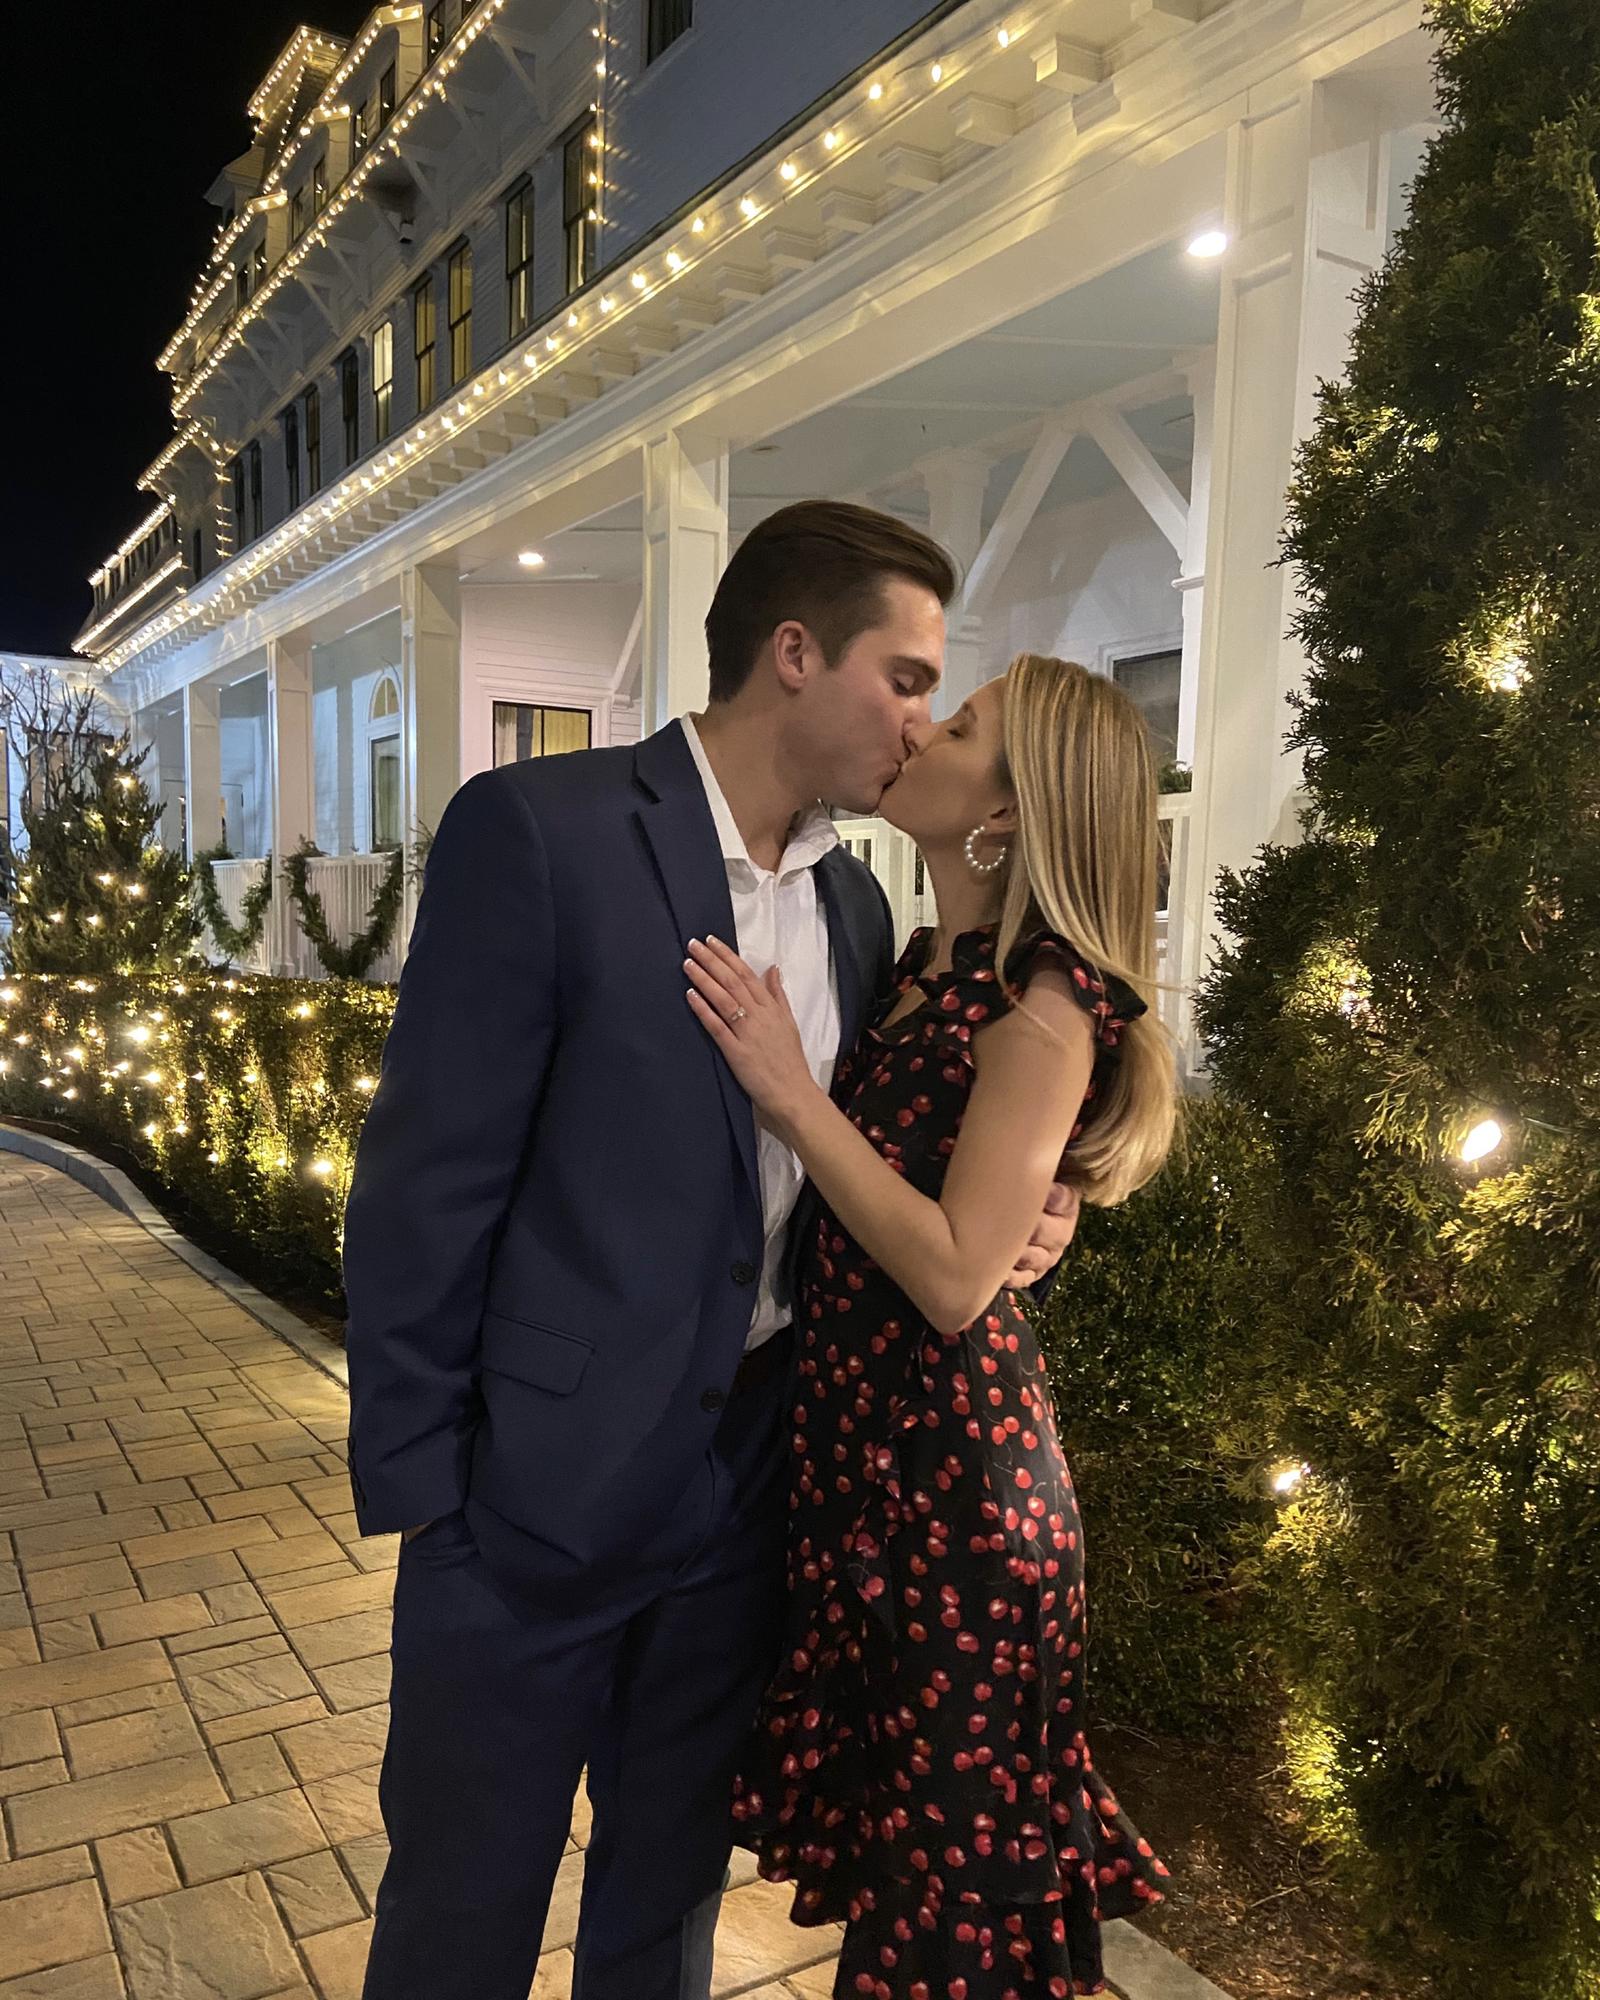 Wentworth by-the-sea Hotel December 17, 21. Our engagement night!